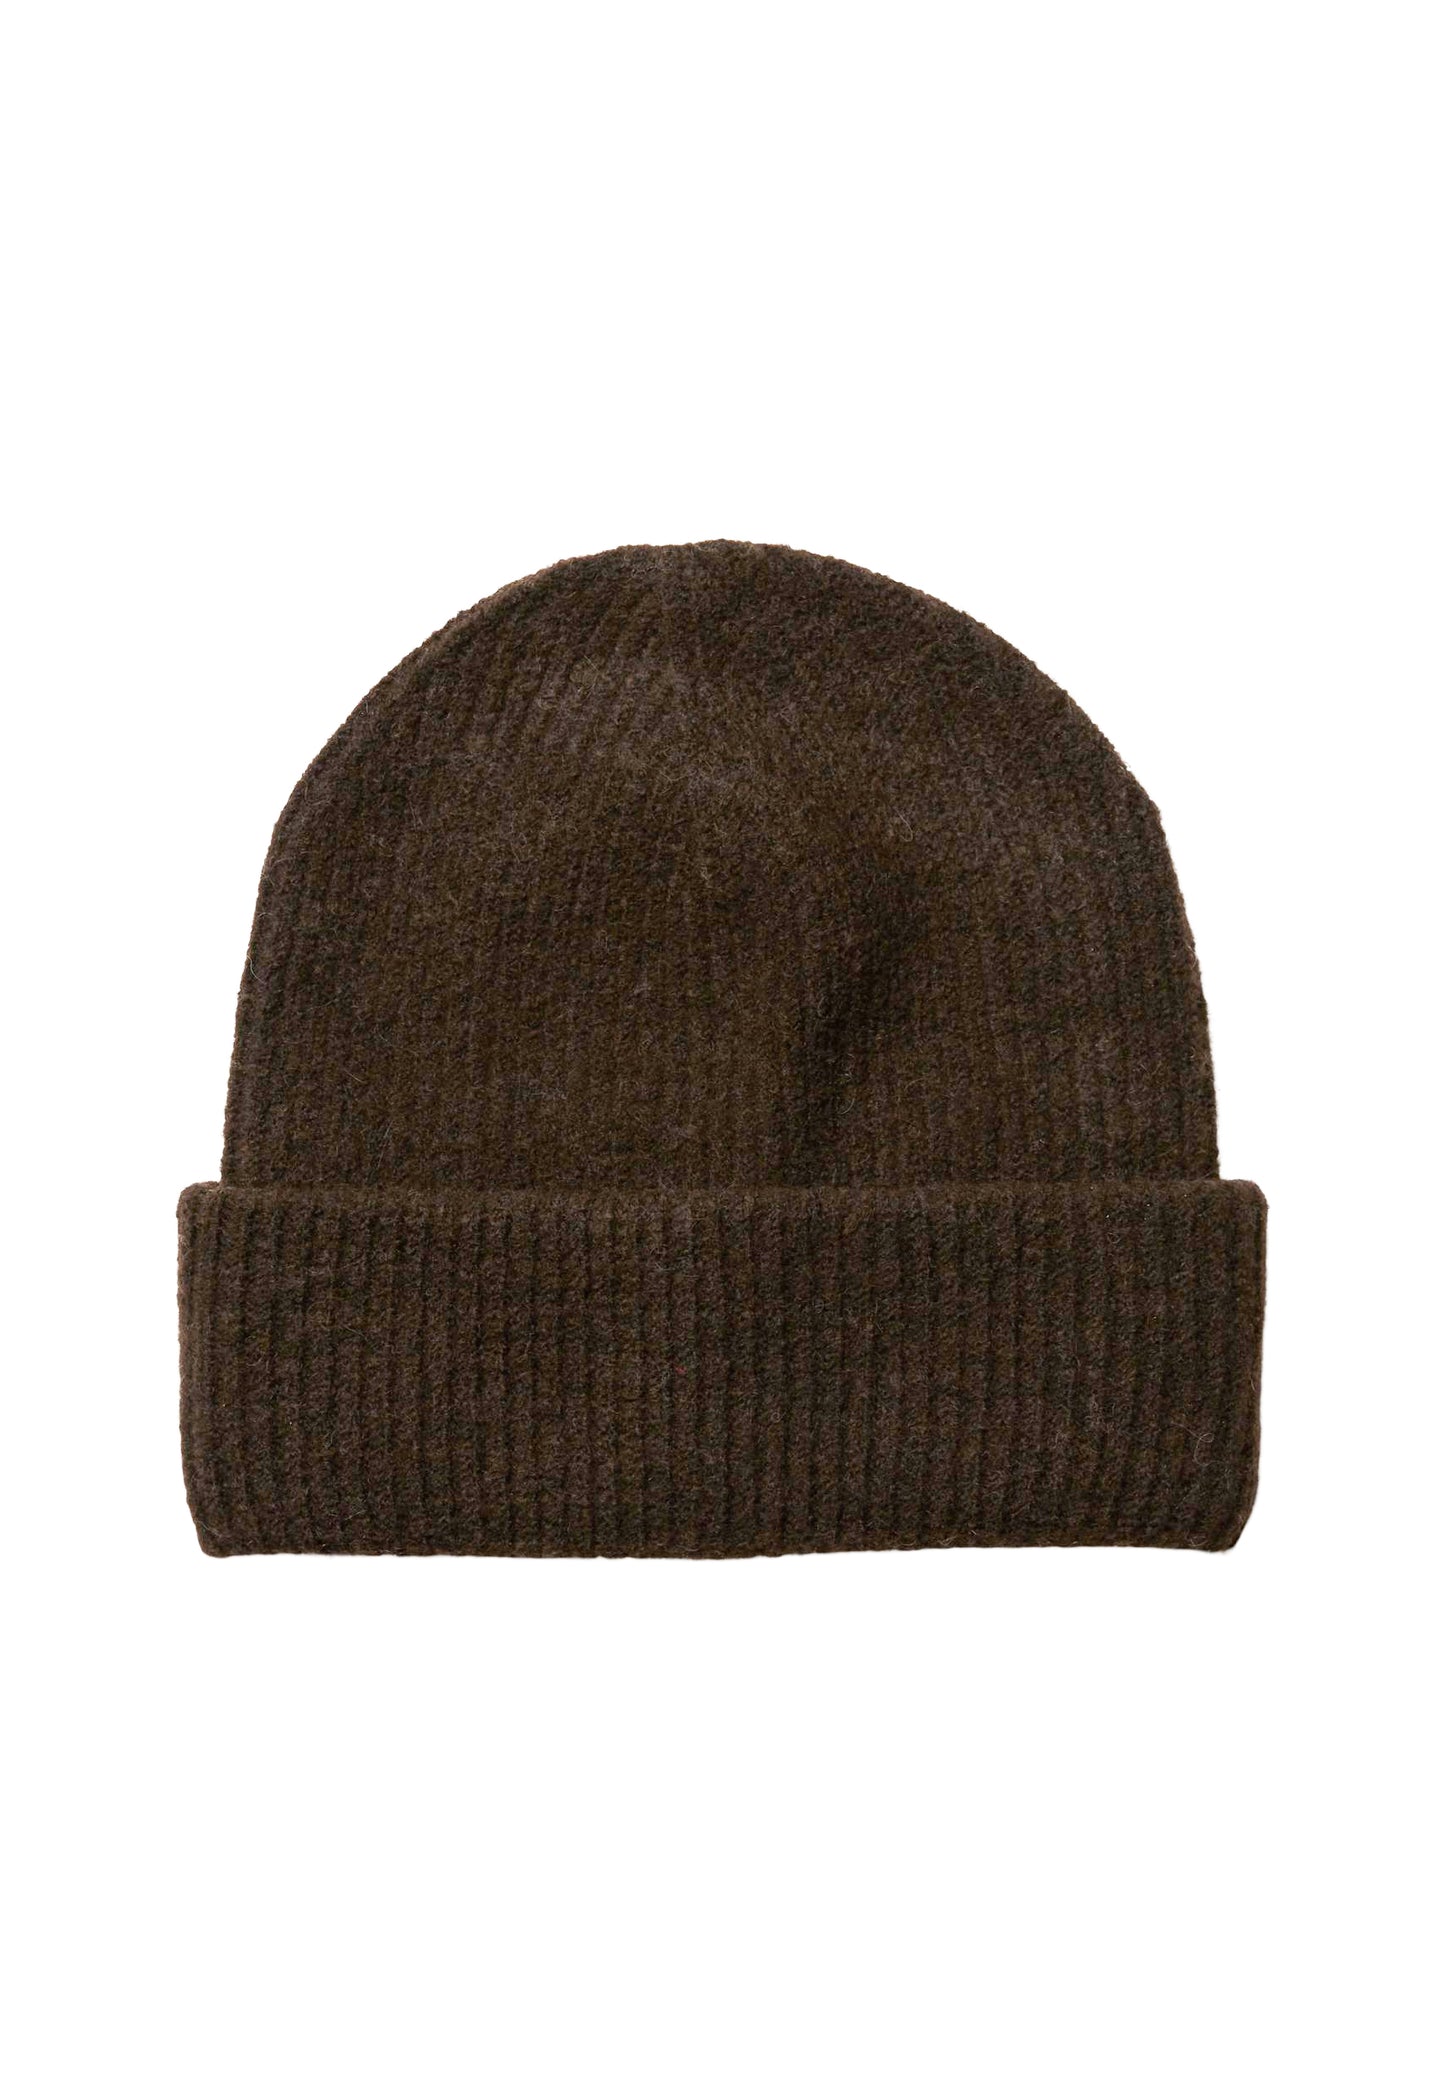 PIECES Cashmere Fluffy Knit Ribbed Turn Up Beanie Hat in Chocolate Brown - One Nation Clothing